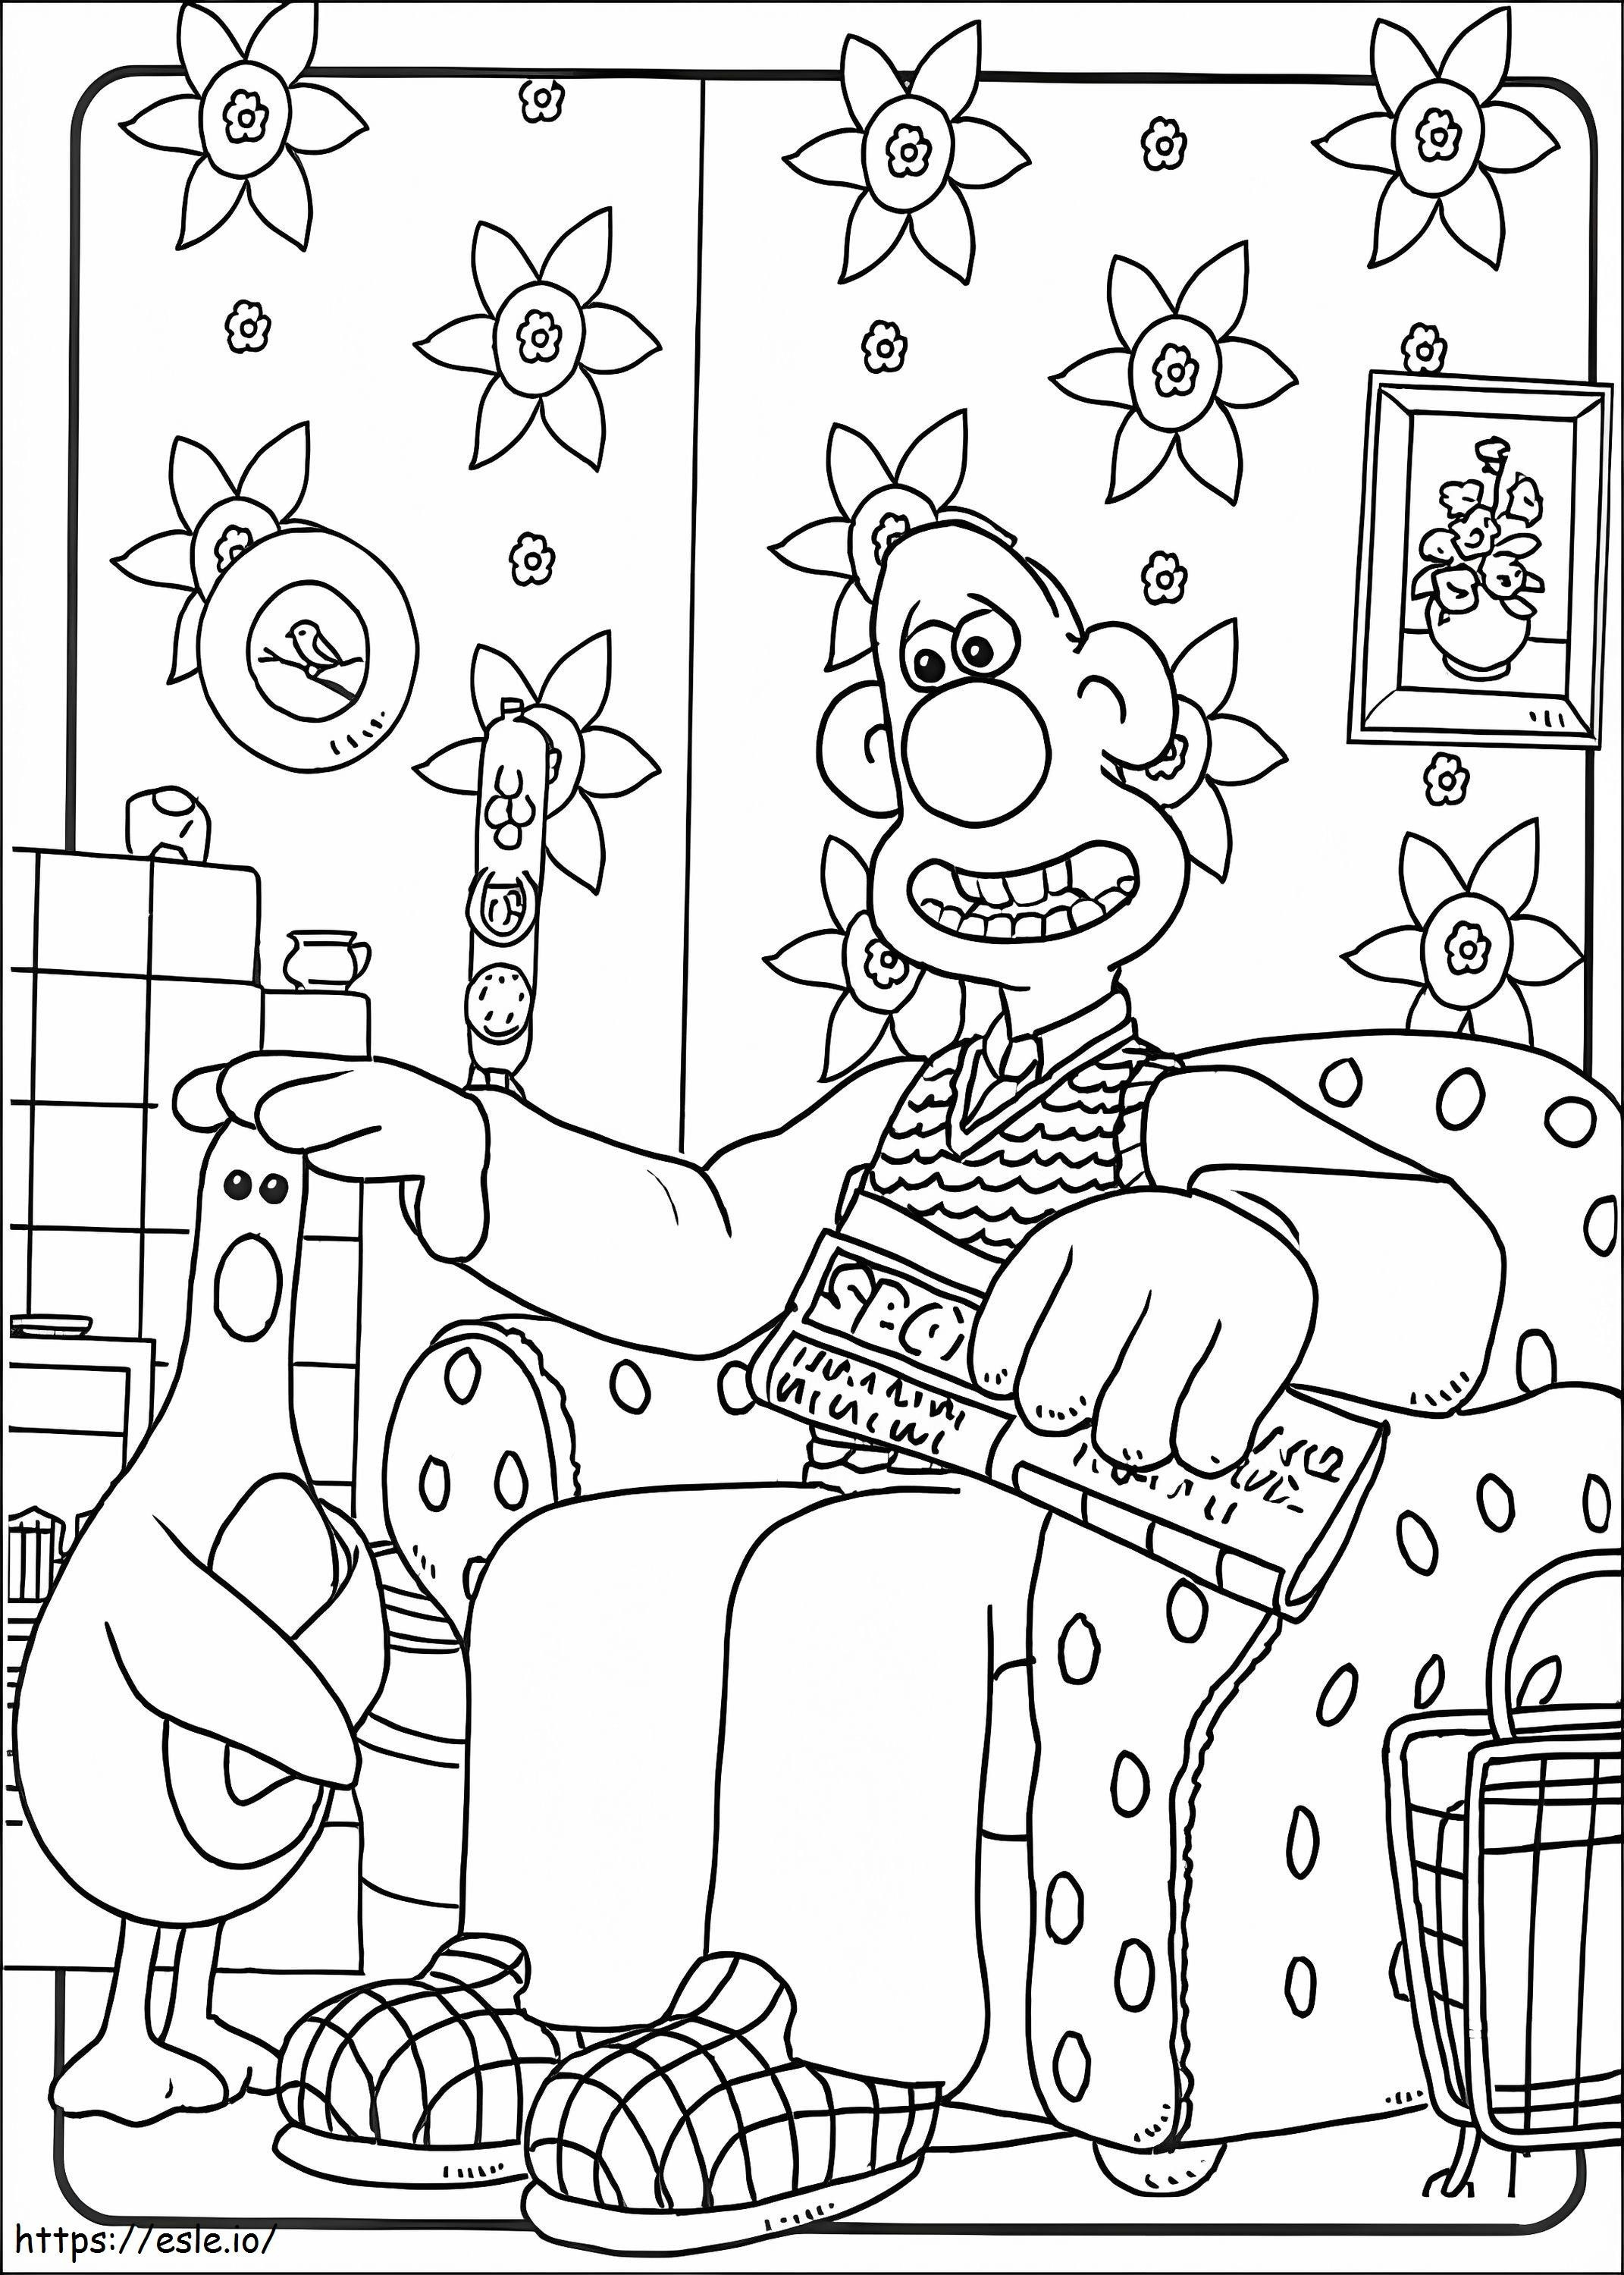 Wallace And Penguin coloring page